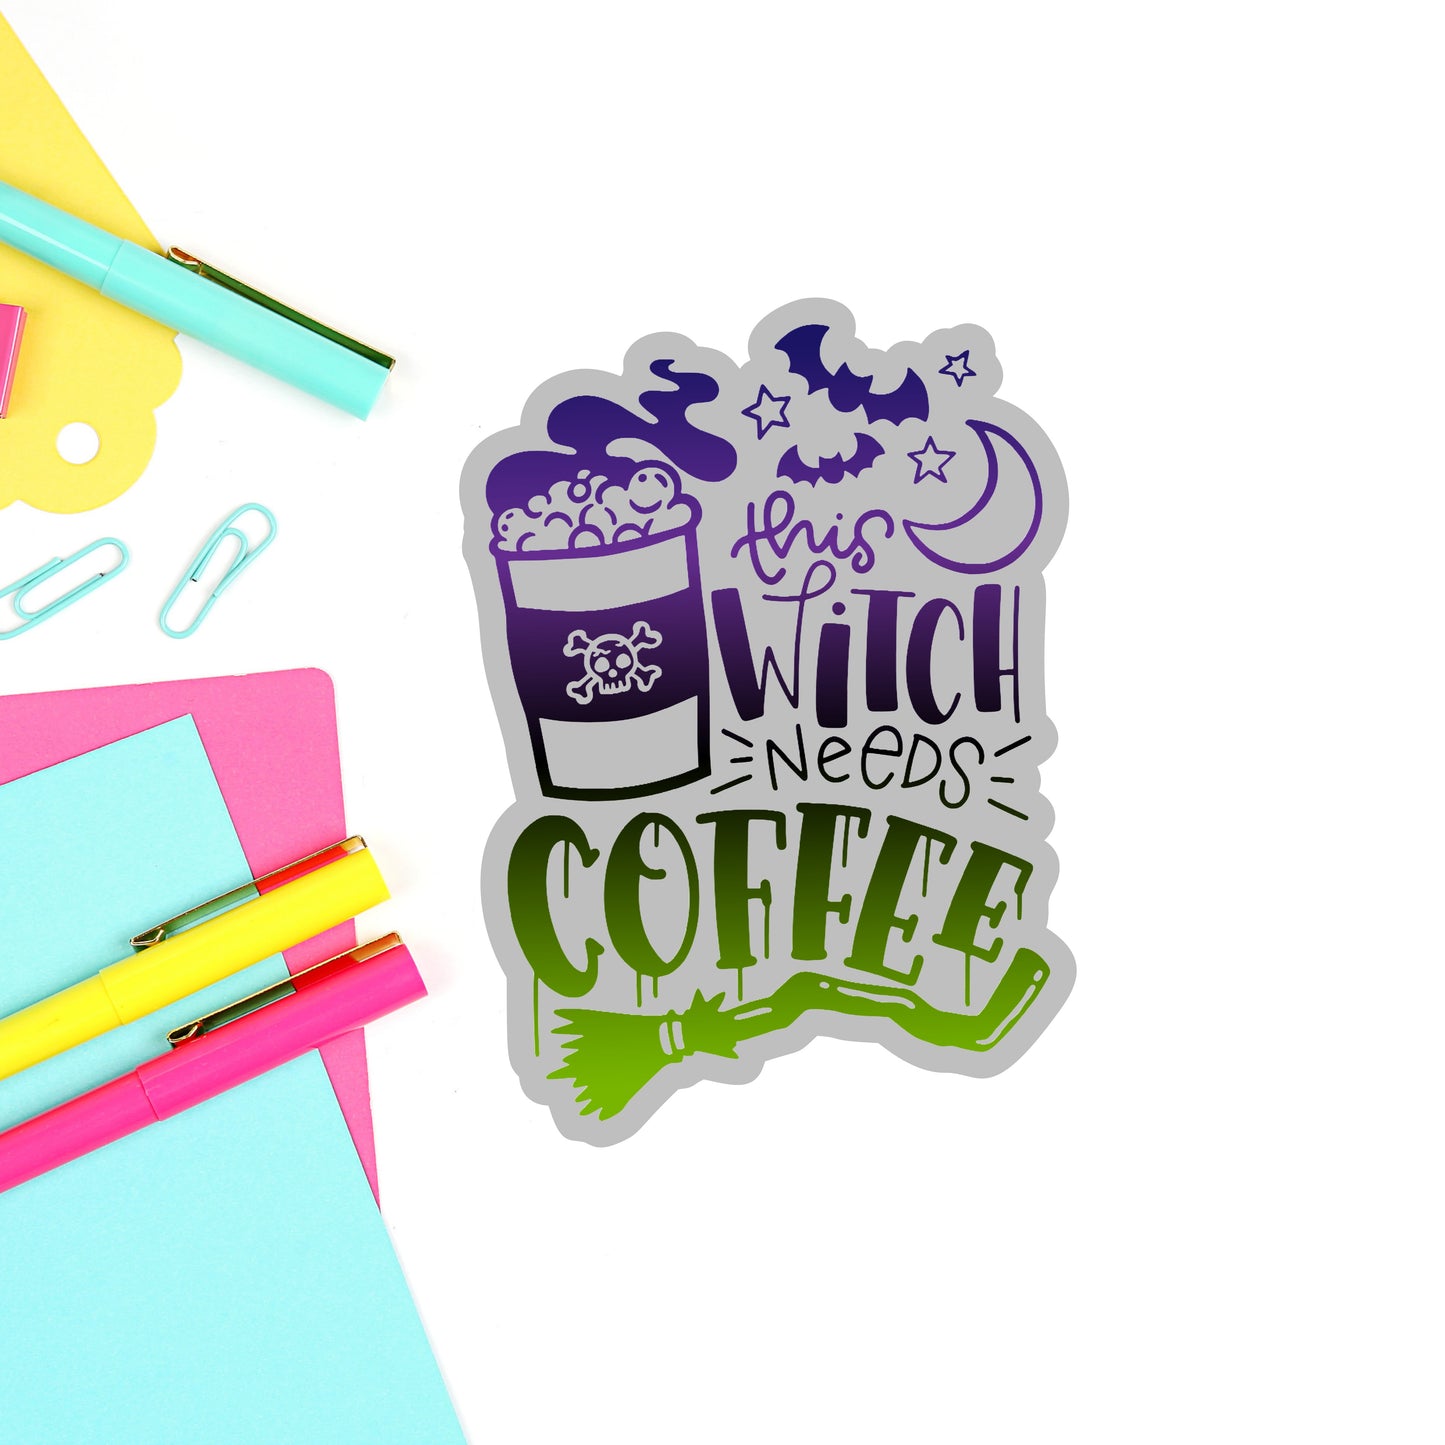 This Witch Needs Coffee Decal